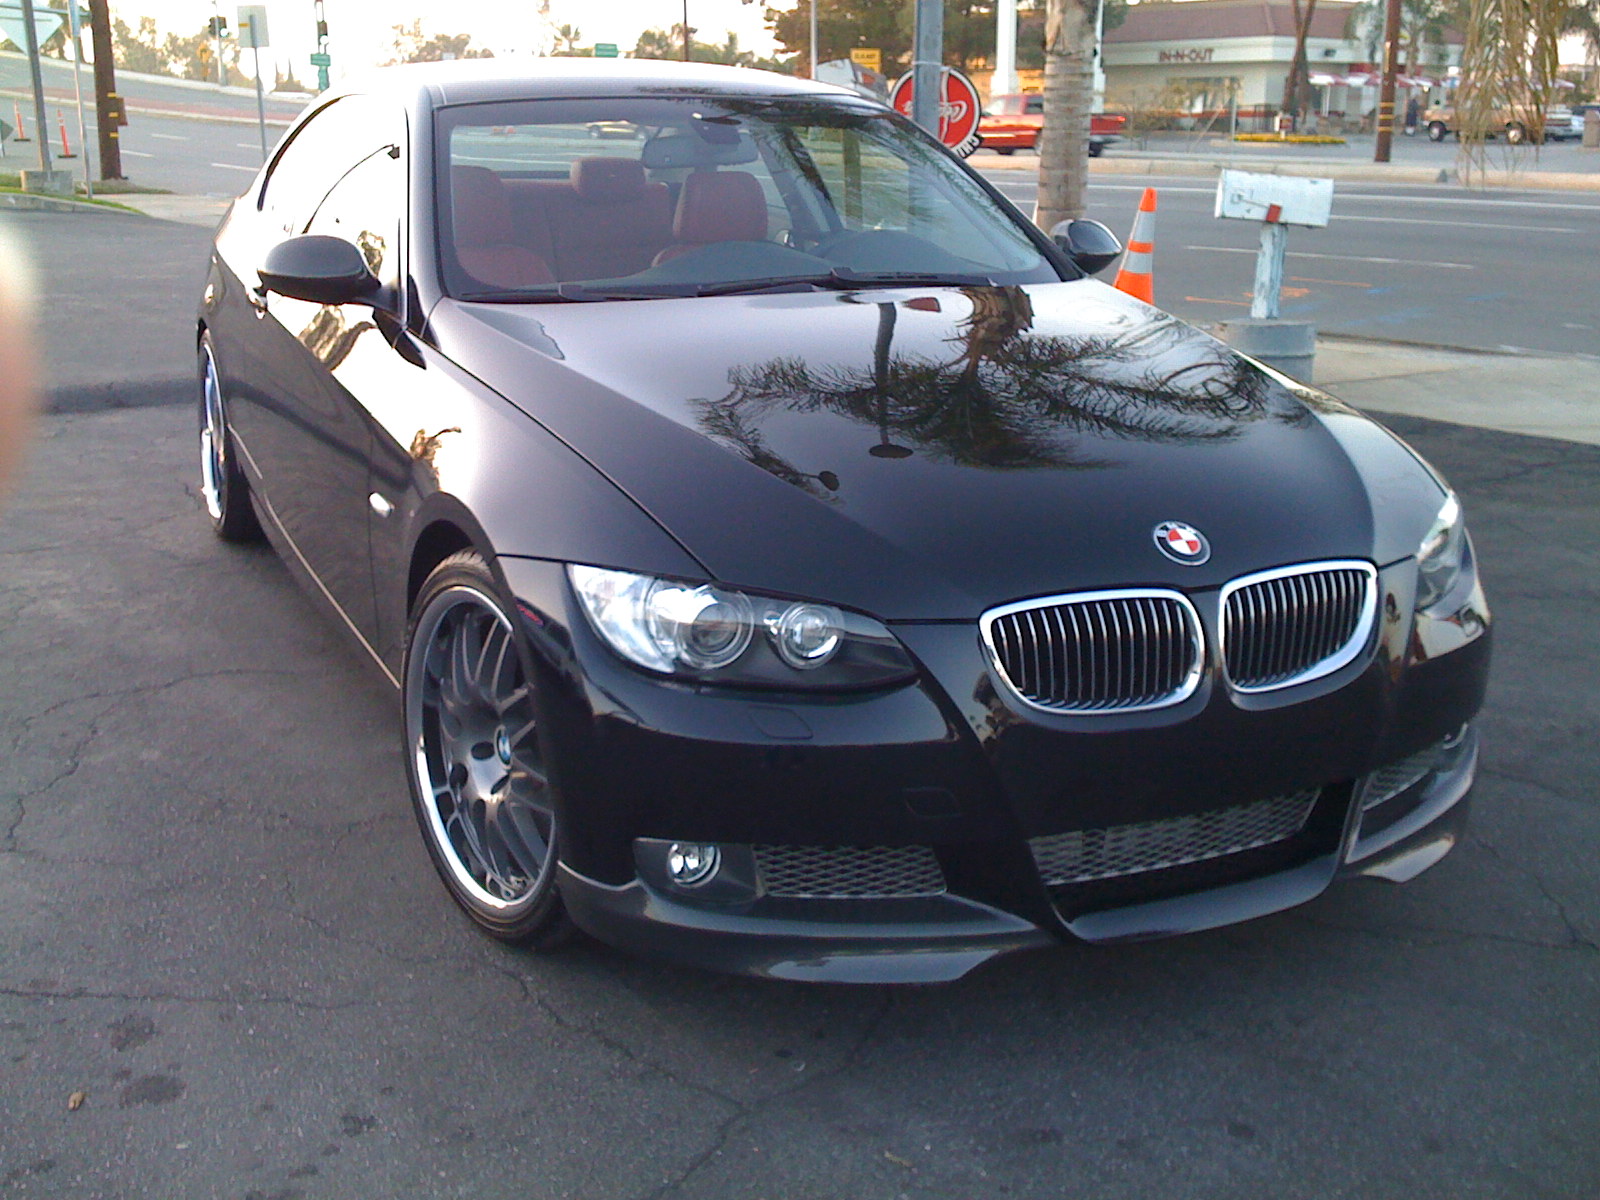 2008 Bmw 335i Coupe Jb3 1 22 Pictures Mods Upgrades